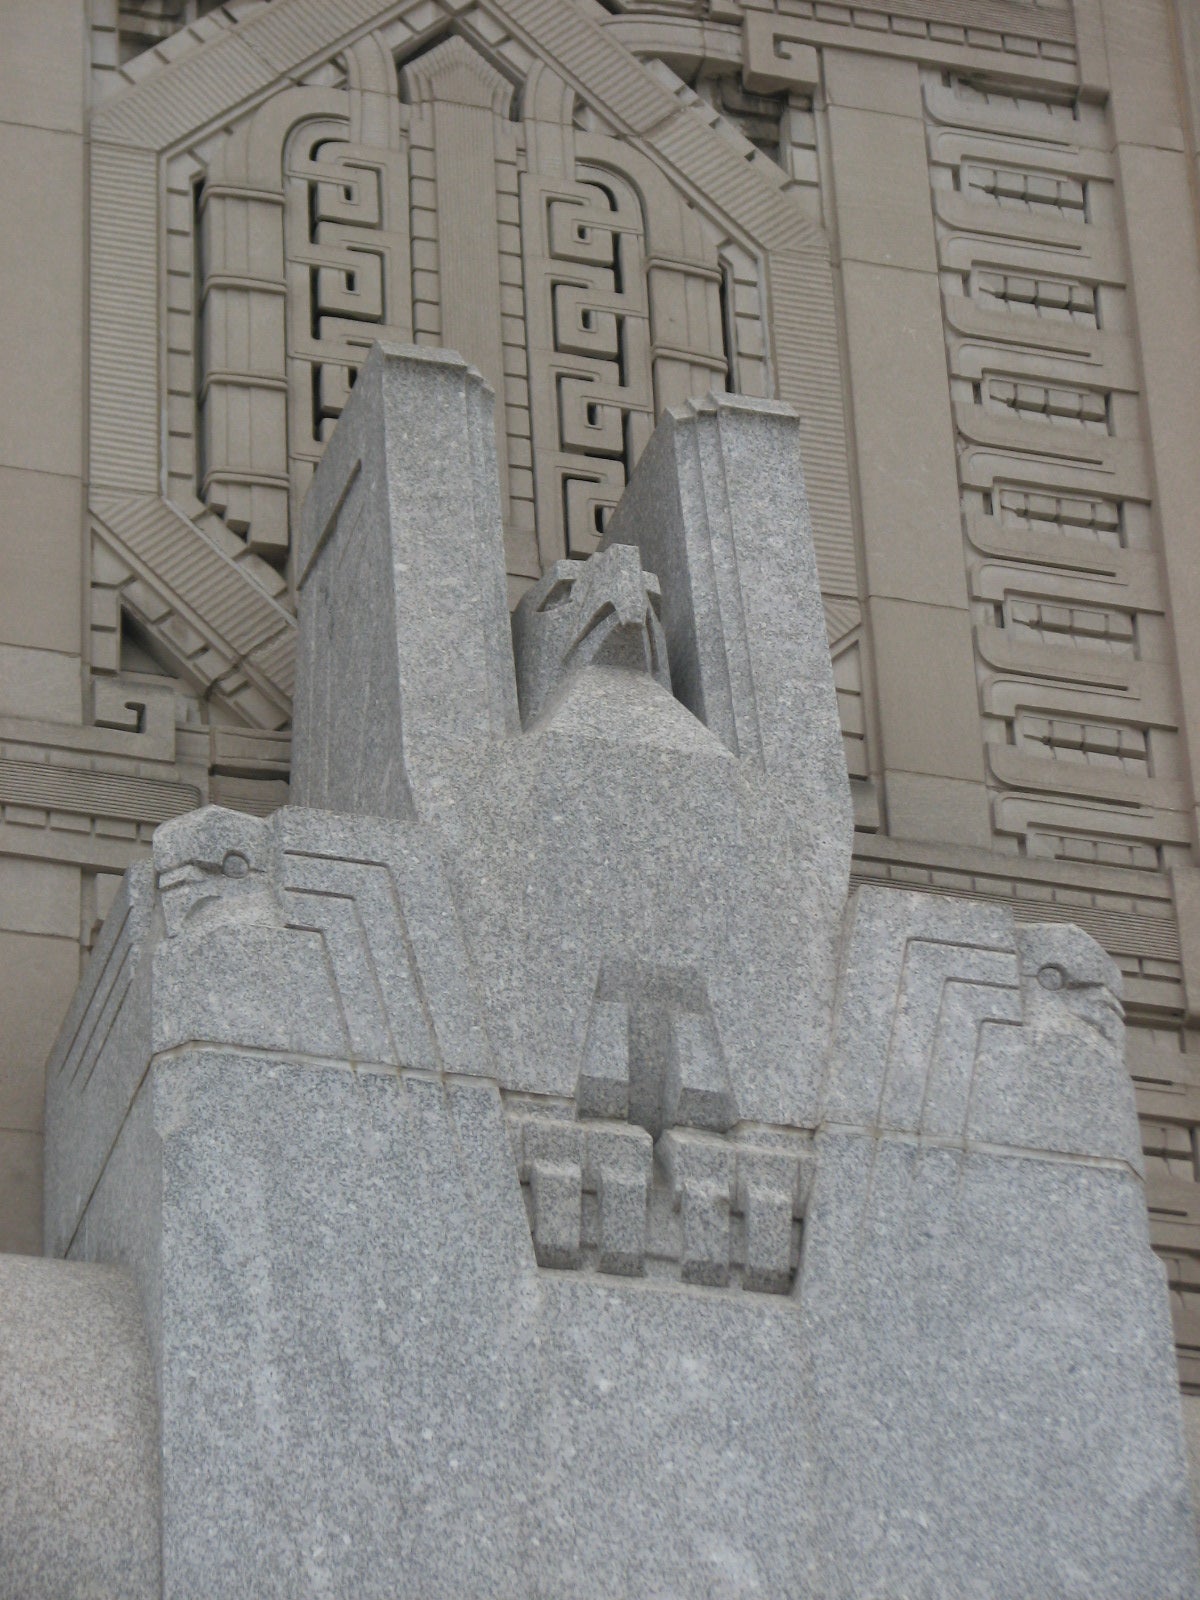 An American eagle caps the main entrance to the former post office building at 30th and Market Streets.